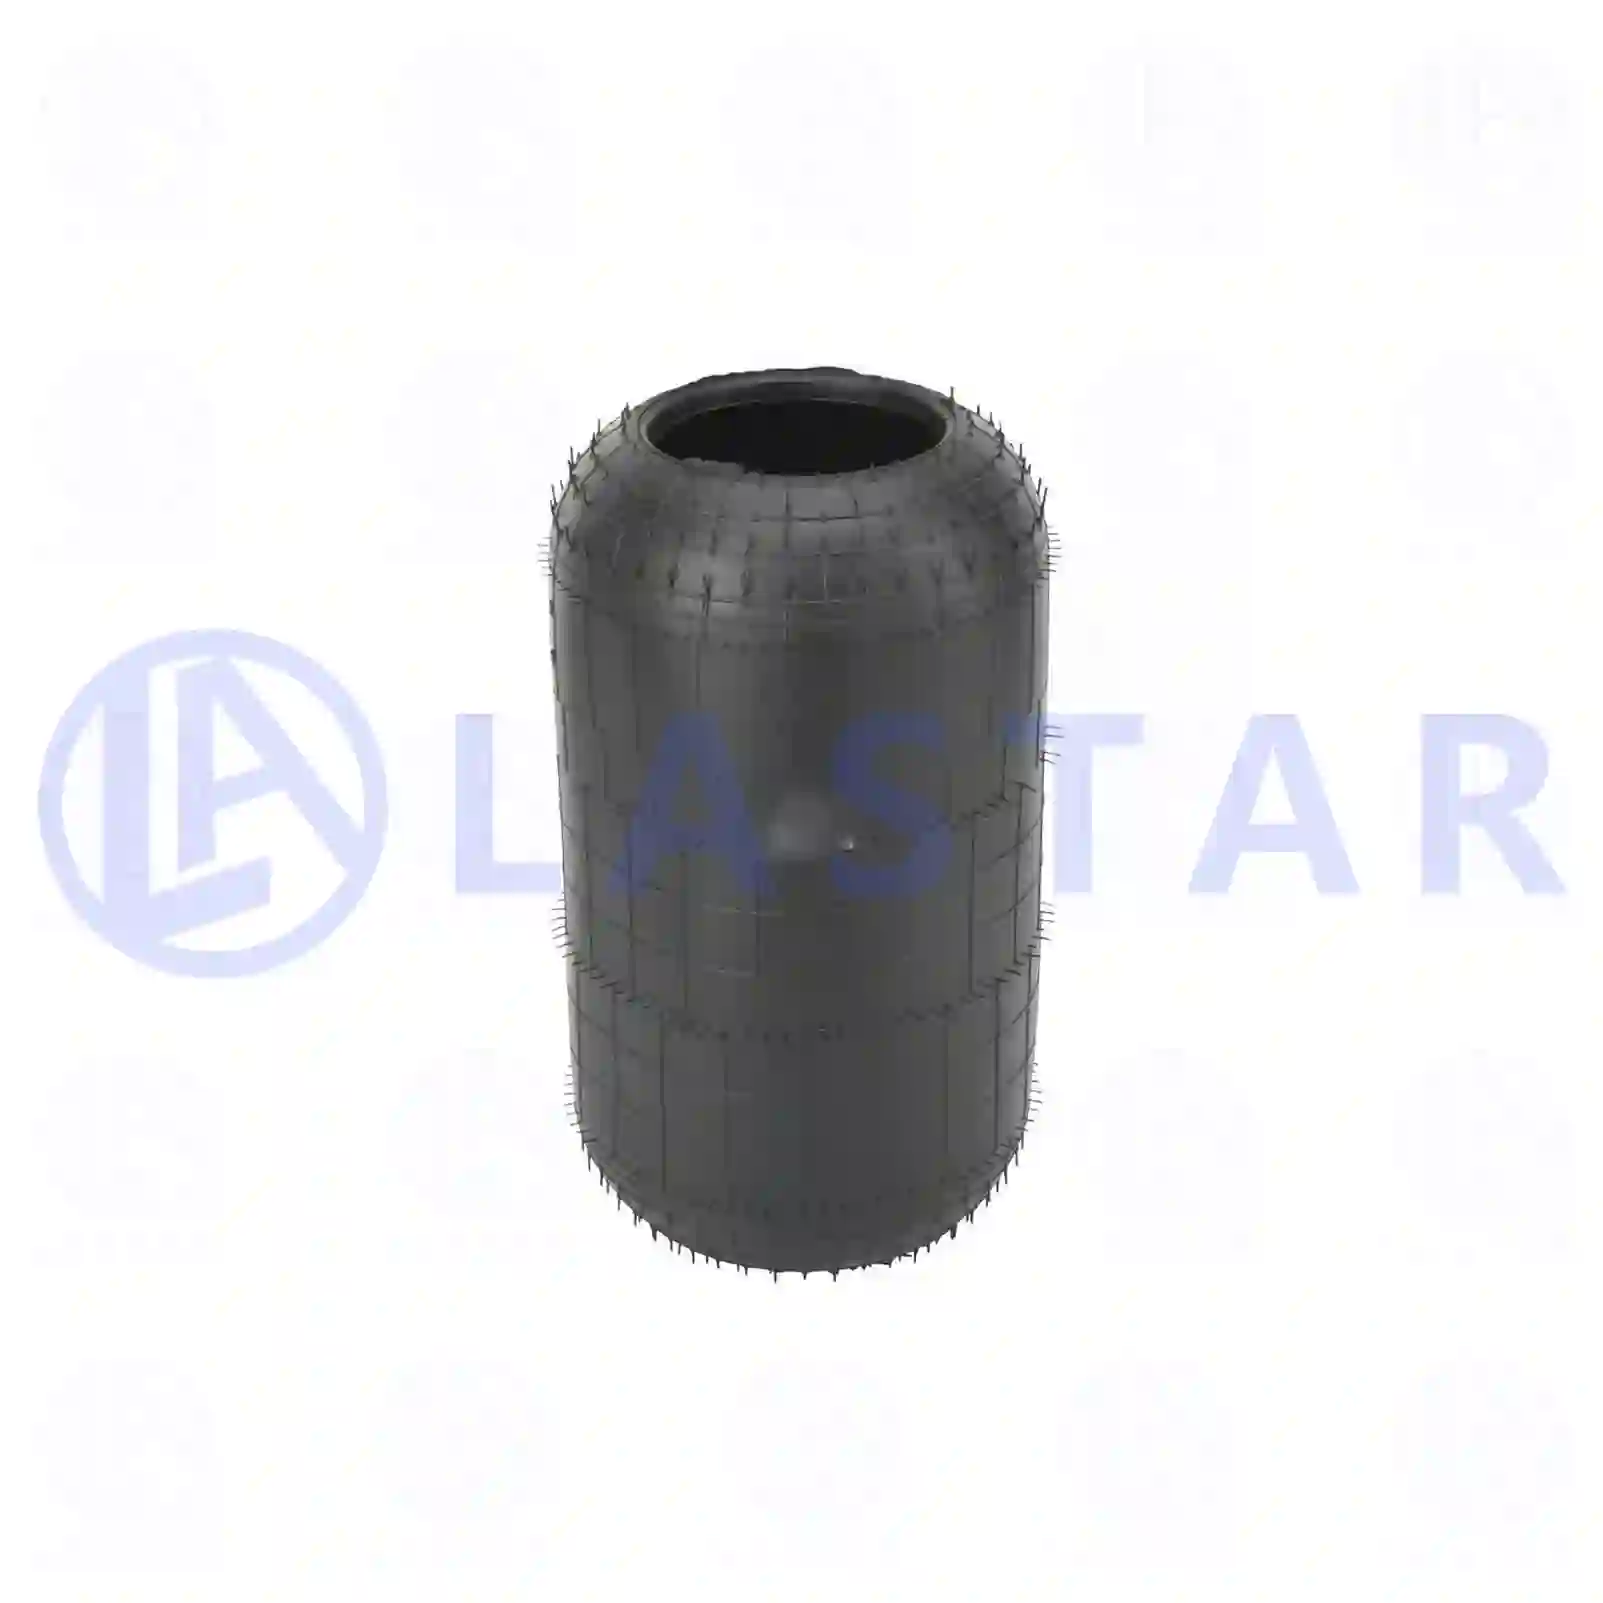 Air spring, without piston, 77727667, 04703972, 04714025, 04722525, 04738008, 04739008, 05254025, 06657150, 08188526, 42261056, 4703972, 4714025, 4722525, 4738008, 4739008, 5254025, 6657150, 8188526, MLF7006, 523229, 4840005, ZG40831-0008 ||  77727667 Lastar Spare Part | Truck Spare Parts, Auotomotive Spare Parts Air spring, without piston, 77727667, 04703972, 04714025, 04722525, 04738008, 04739008, 05254025, 06657150, 08188526, 42261056, 4703972, 4714025, 4722525, 4738008, 4739008, 5254025, 6657150, 8188526, MLF7006, 523229, 4840005, ZG40831-0008 ||  77727667 Lastar Spare Part | Truck Spare Parts, Auotomotive Spare Parts